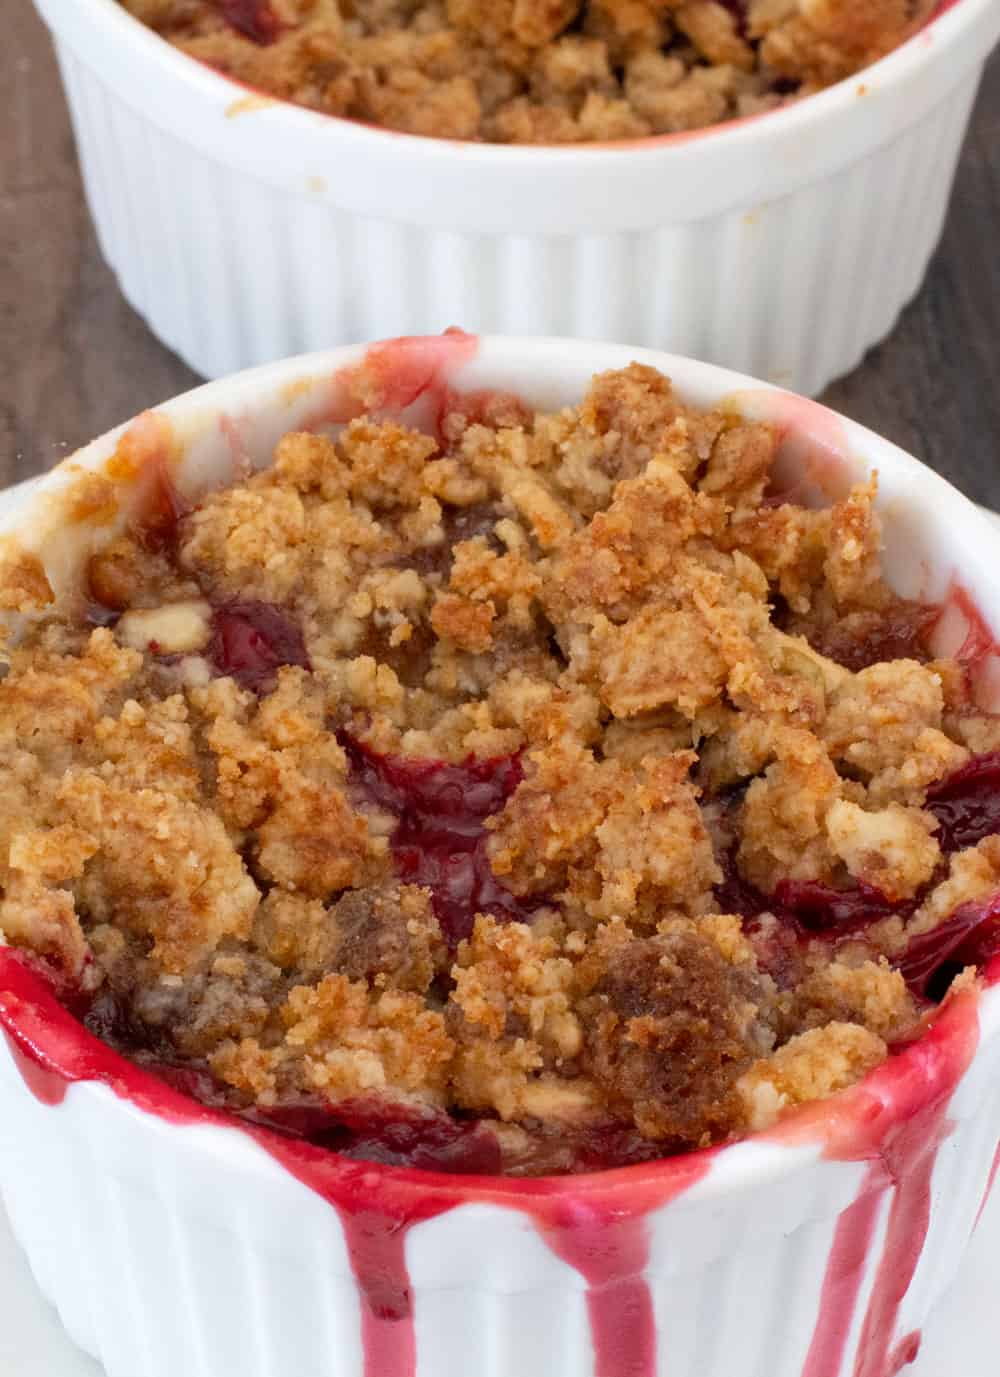 baked fruit with granola streusel topping in a small ramekin ready to eat